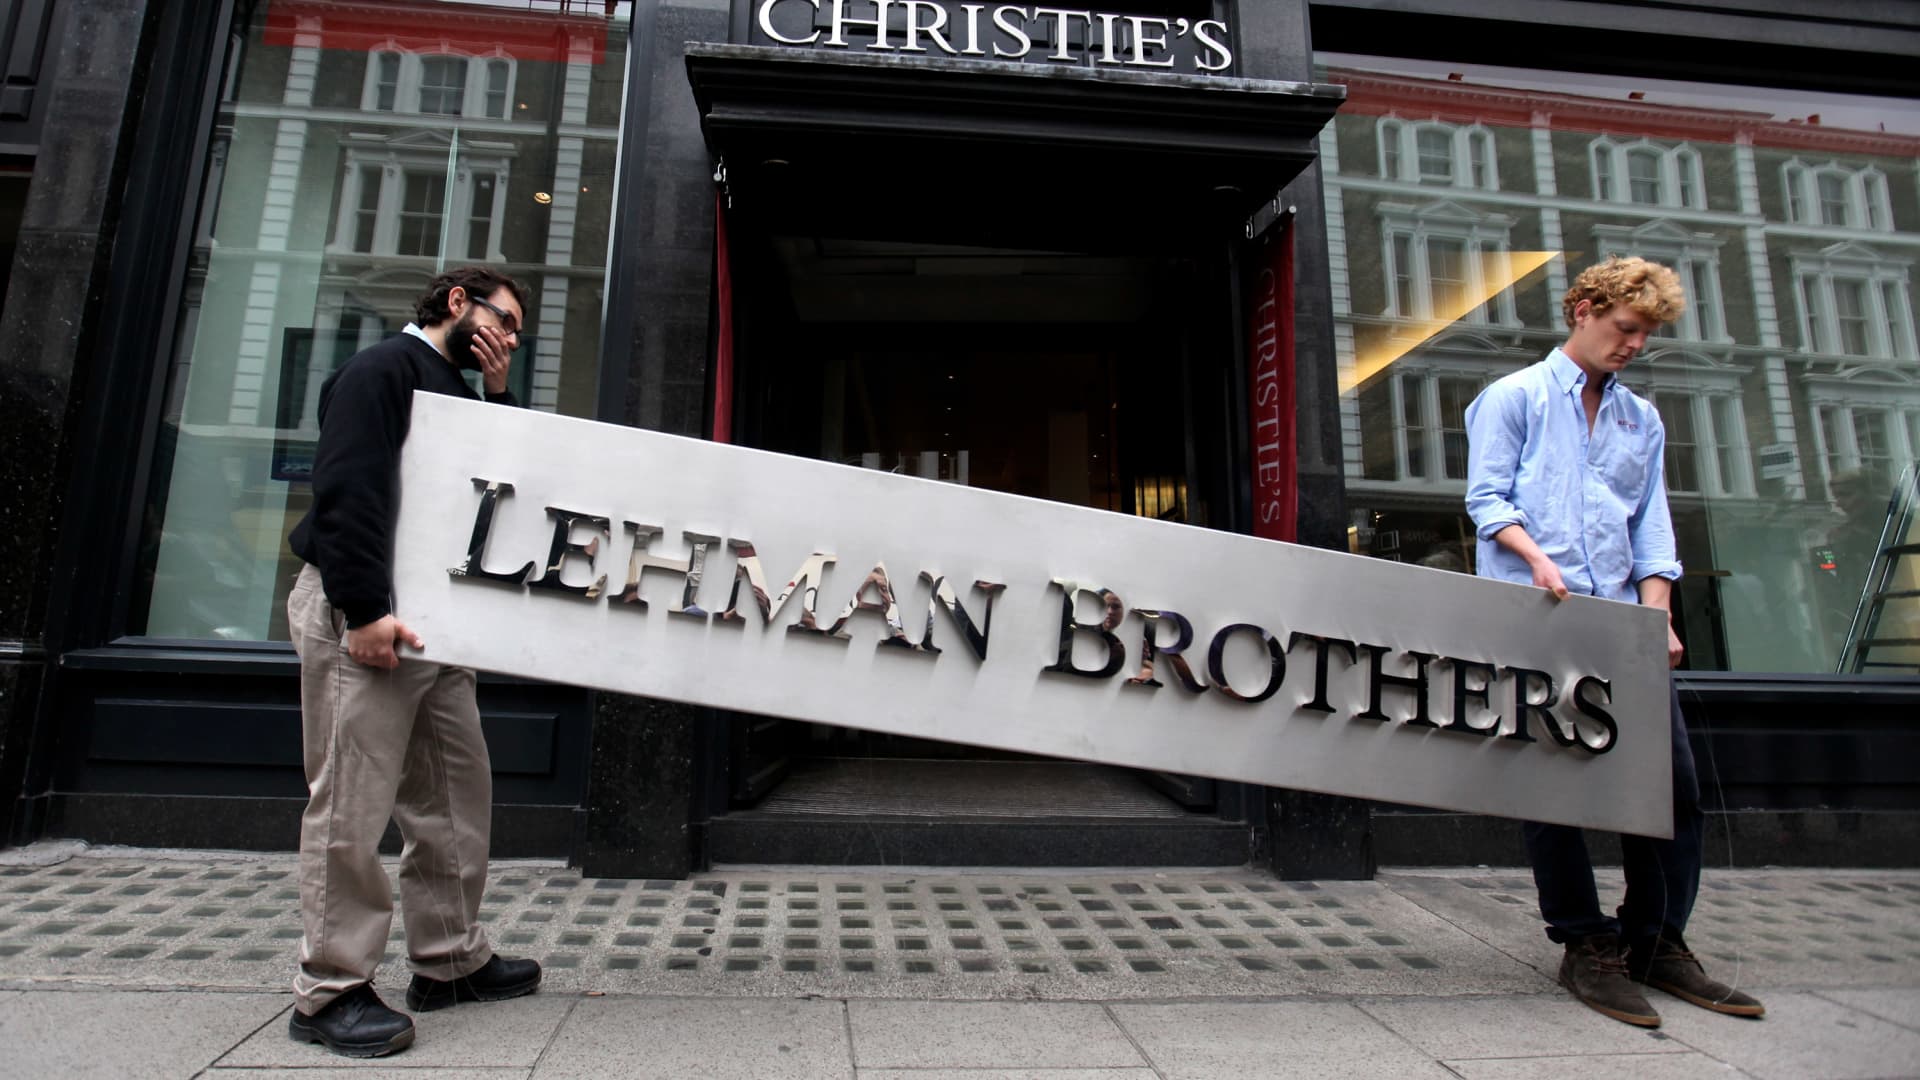 Sept. 15, 2018, will be the 10th anniversary of the collapse of Lehman Brothers, the fourth-largest investment bank in the United States. It was the d